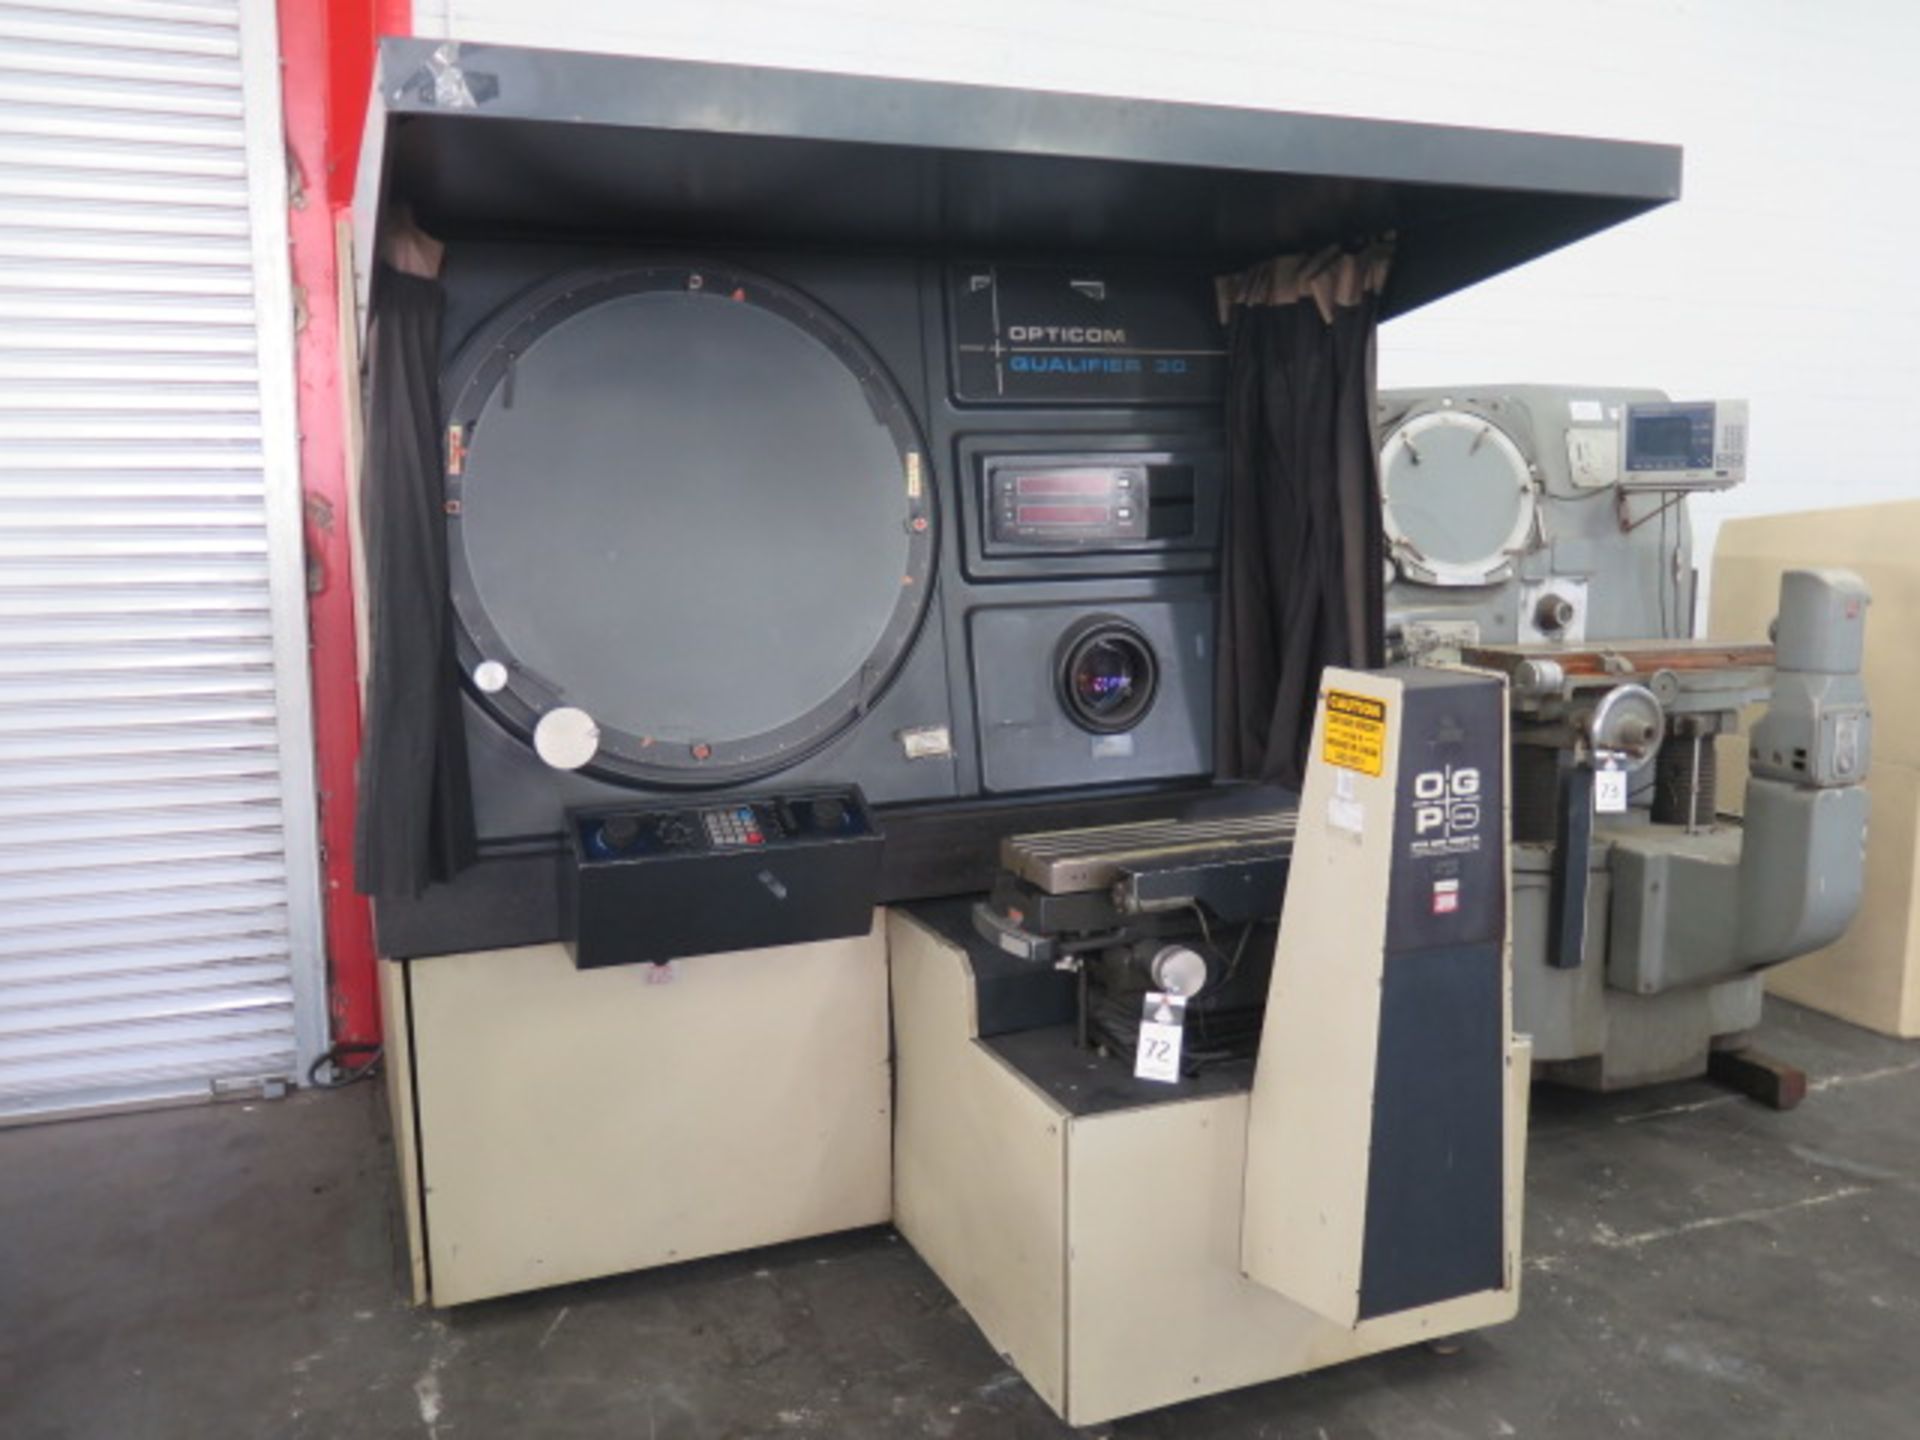 OGP Optical Gaging Co. “Opticon Qualifier 30” mdl. 0030S 30” Optical Comparator s/n 00300-340 w/